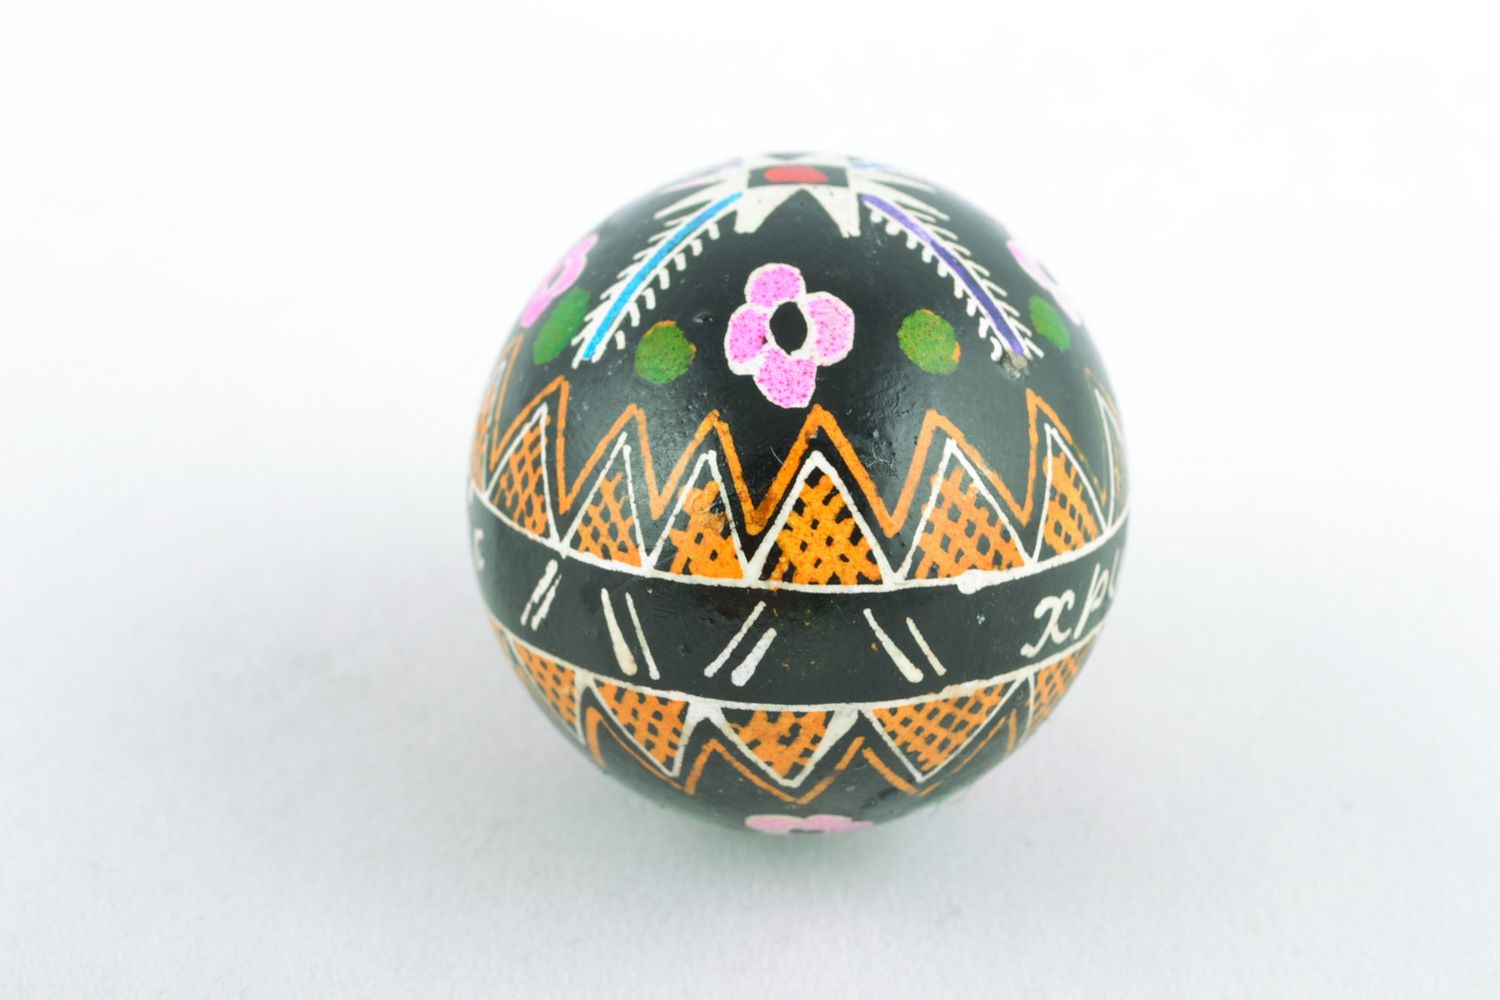 Homemade Easter egg with traditional ornament on black background made with hot wax photo 4